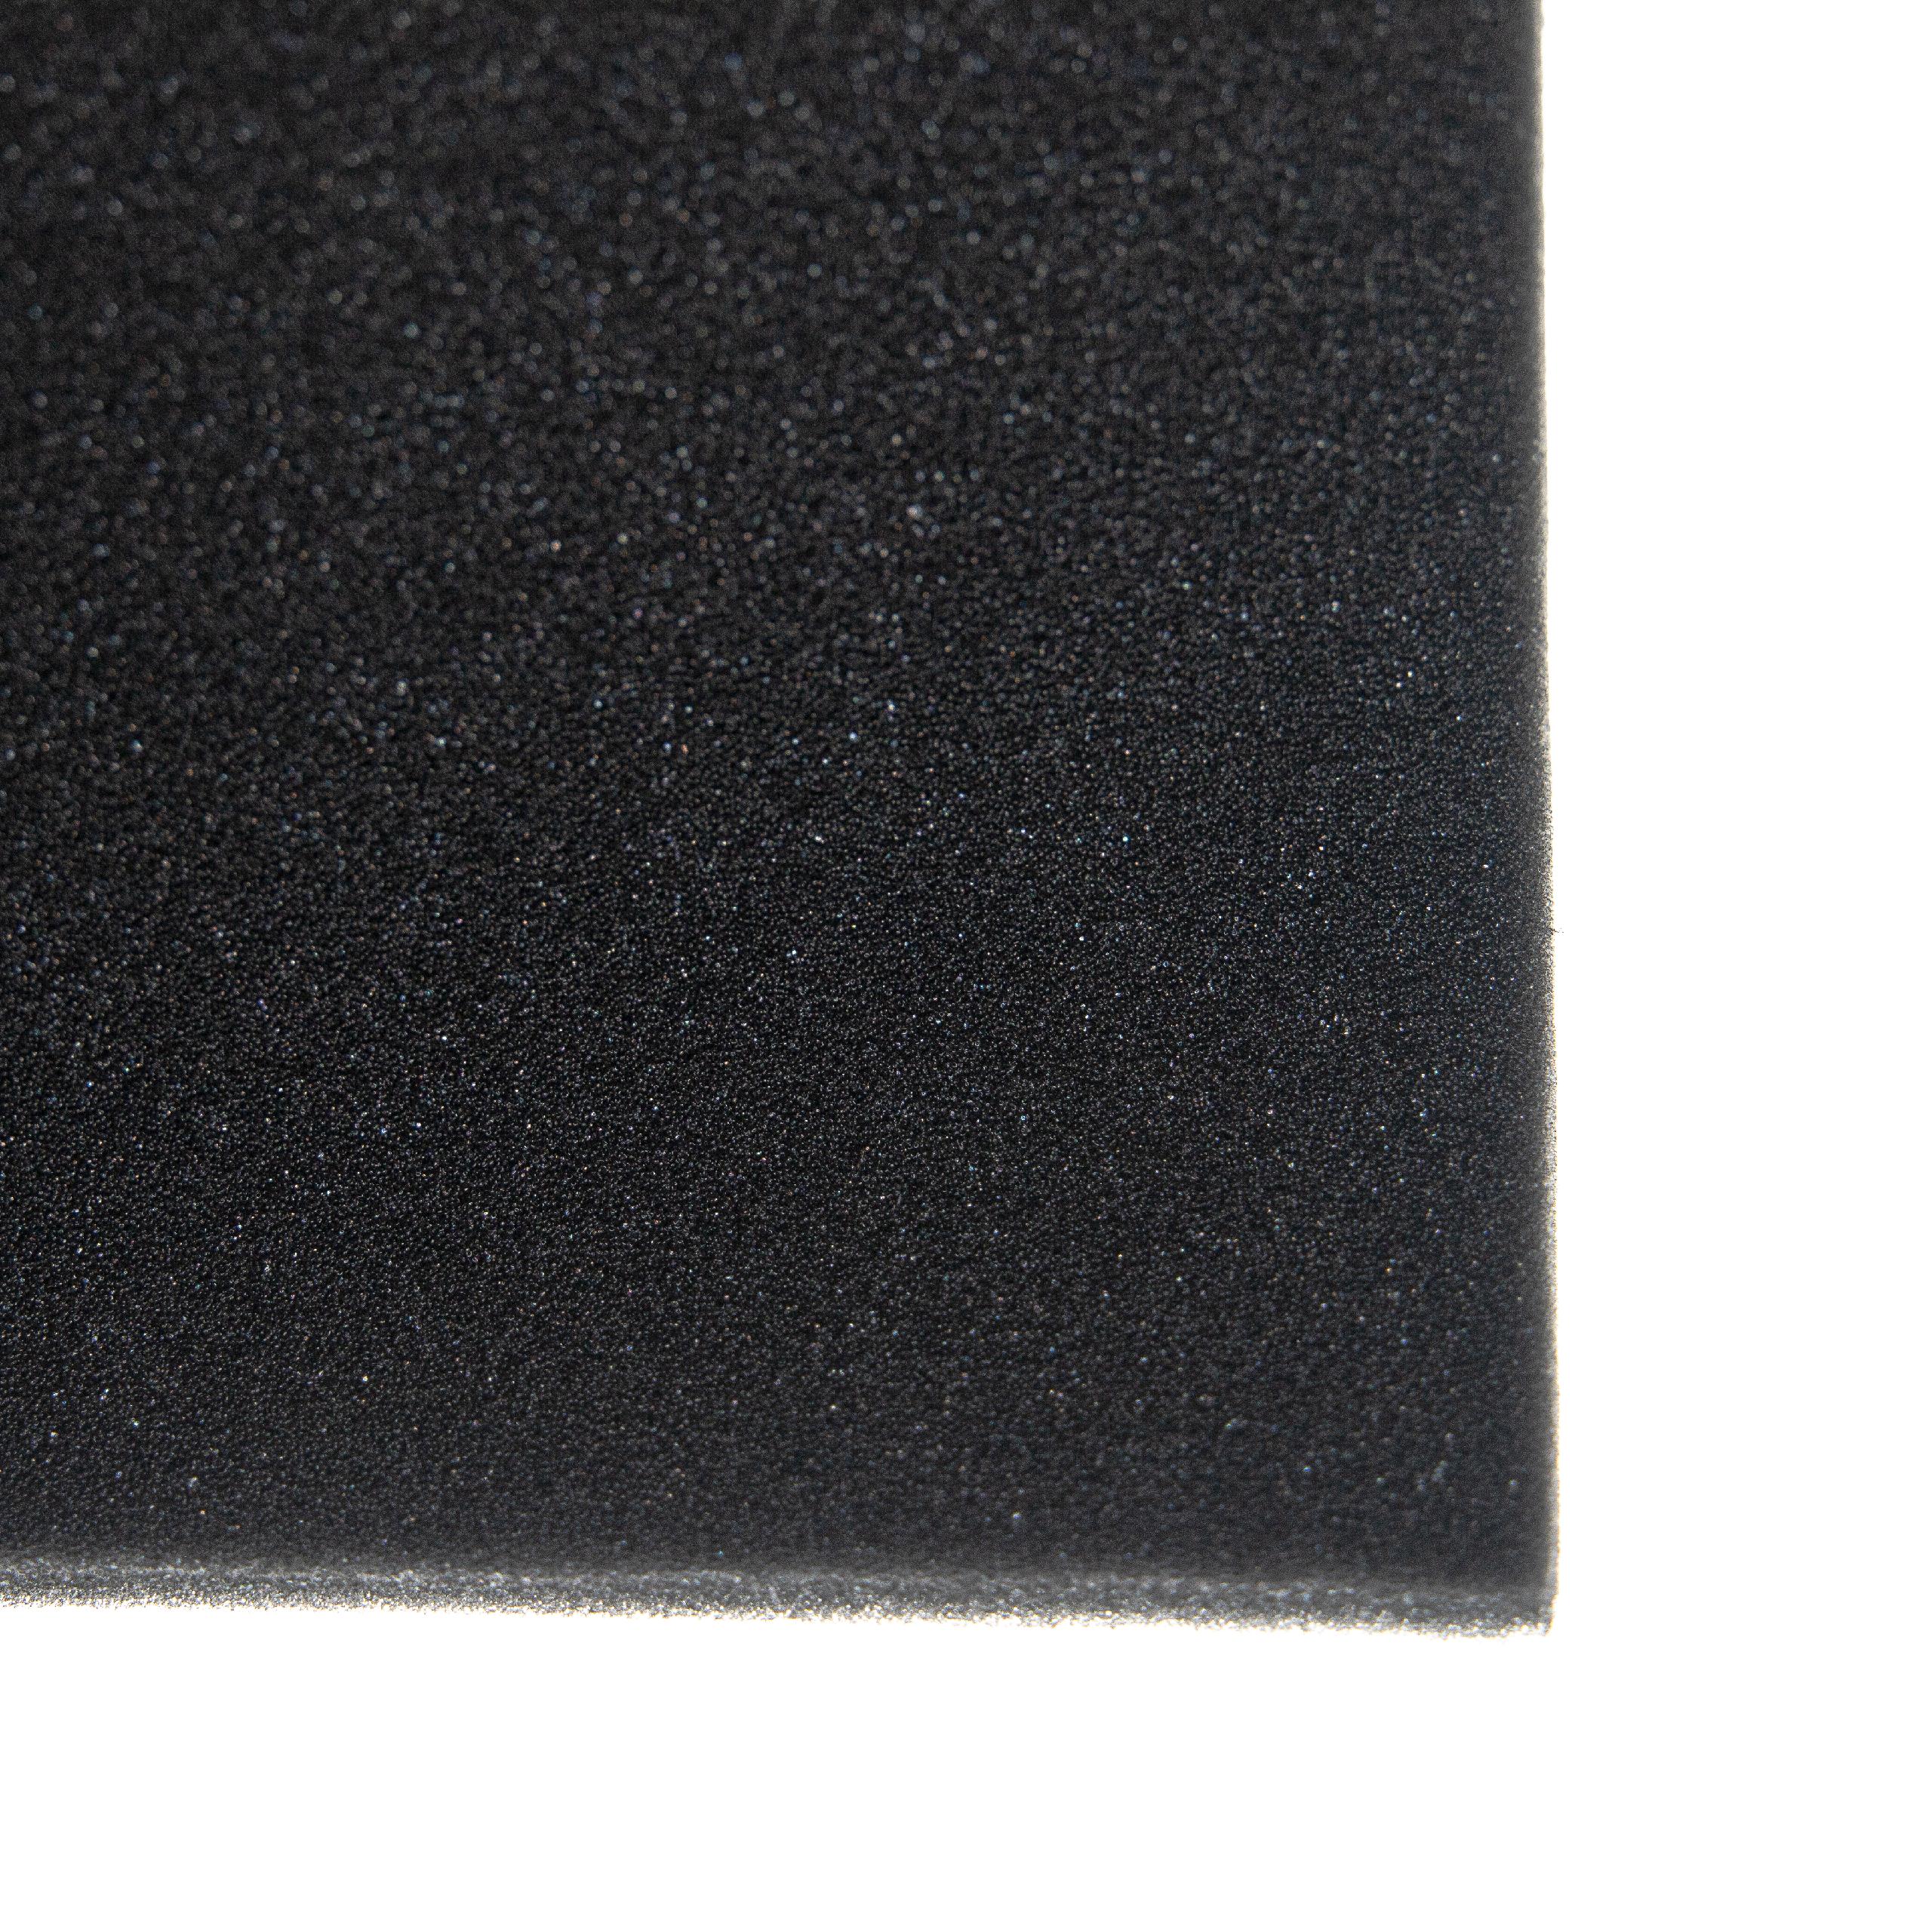 vhbw Foam Insert with Base Panel for Bosch / Sortimo L-Boxx Toolbox - Customisable, Adaptable Foam Black